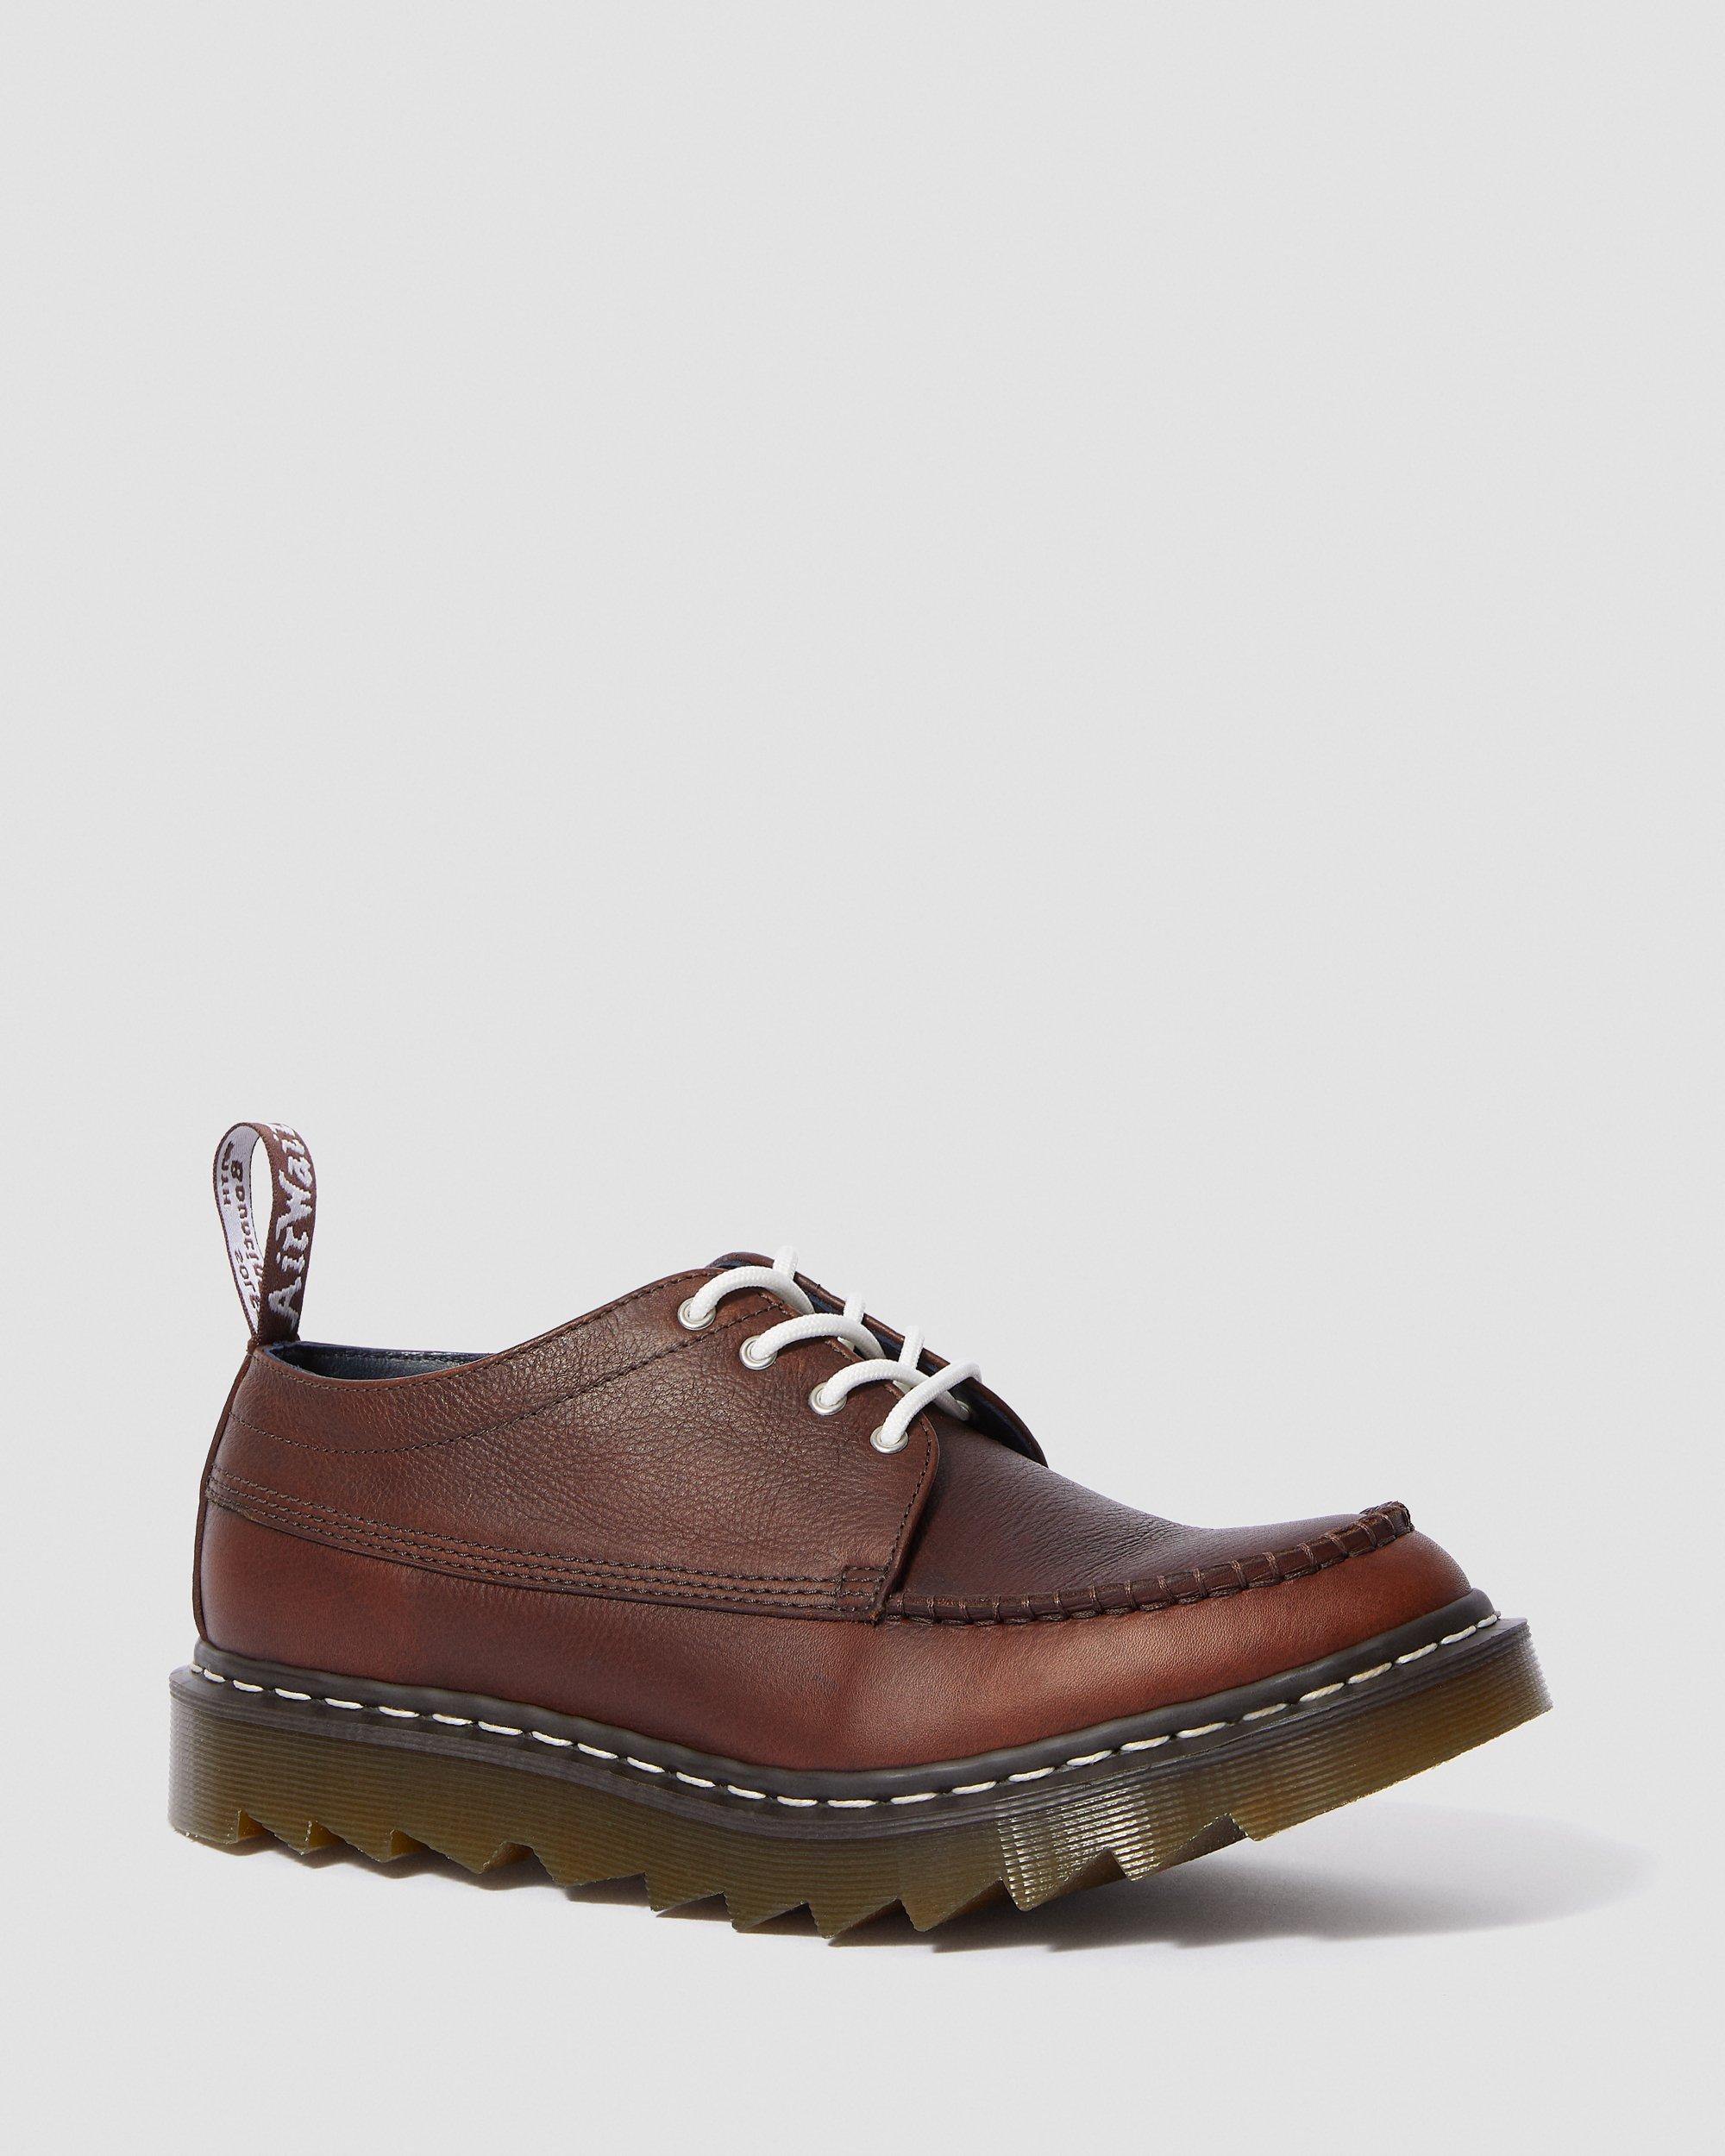 CAMBERWELL NANAMICA LEATHER SHOES in Dark Tan | Dr. Martens